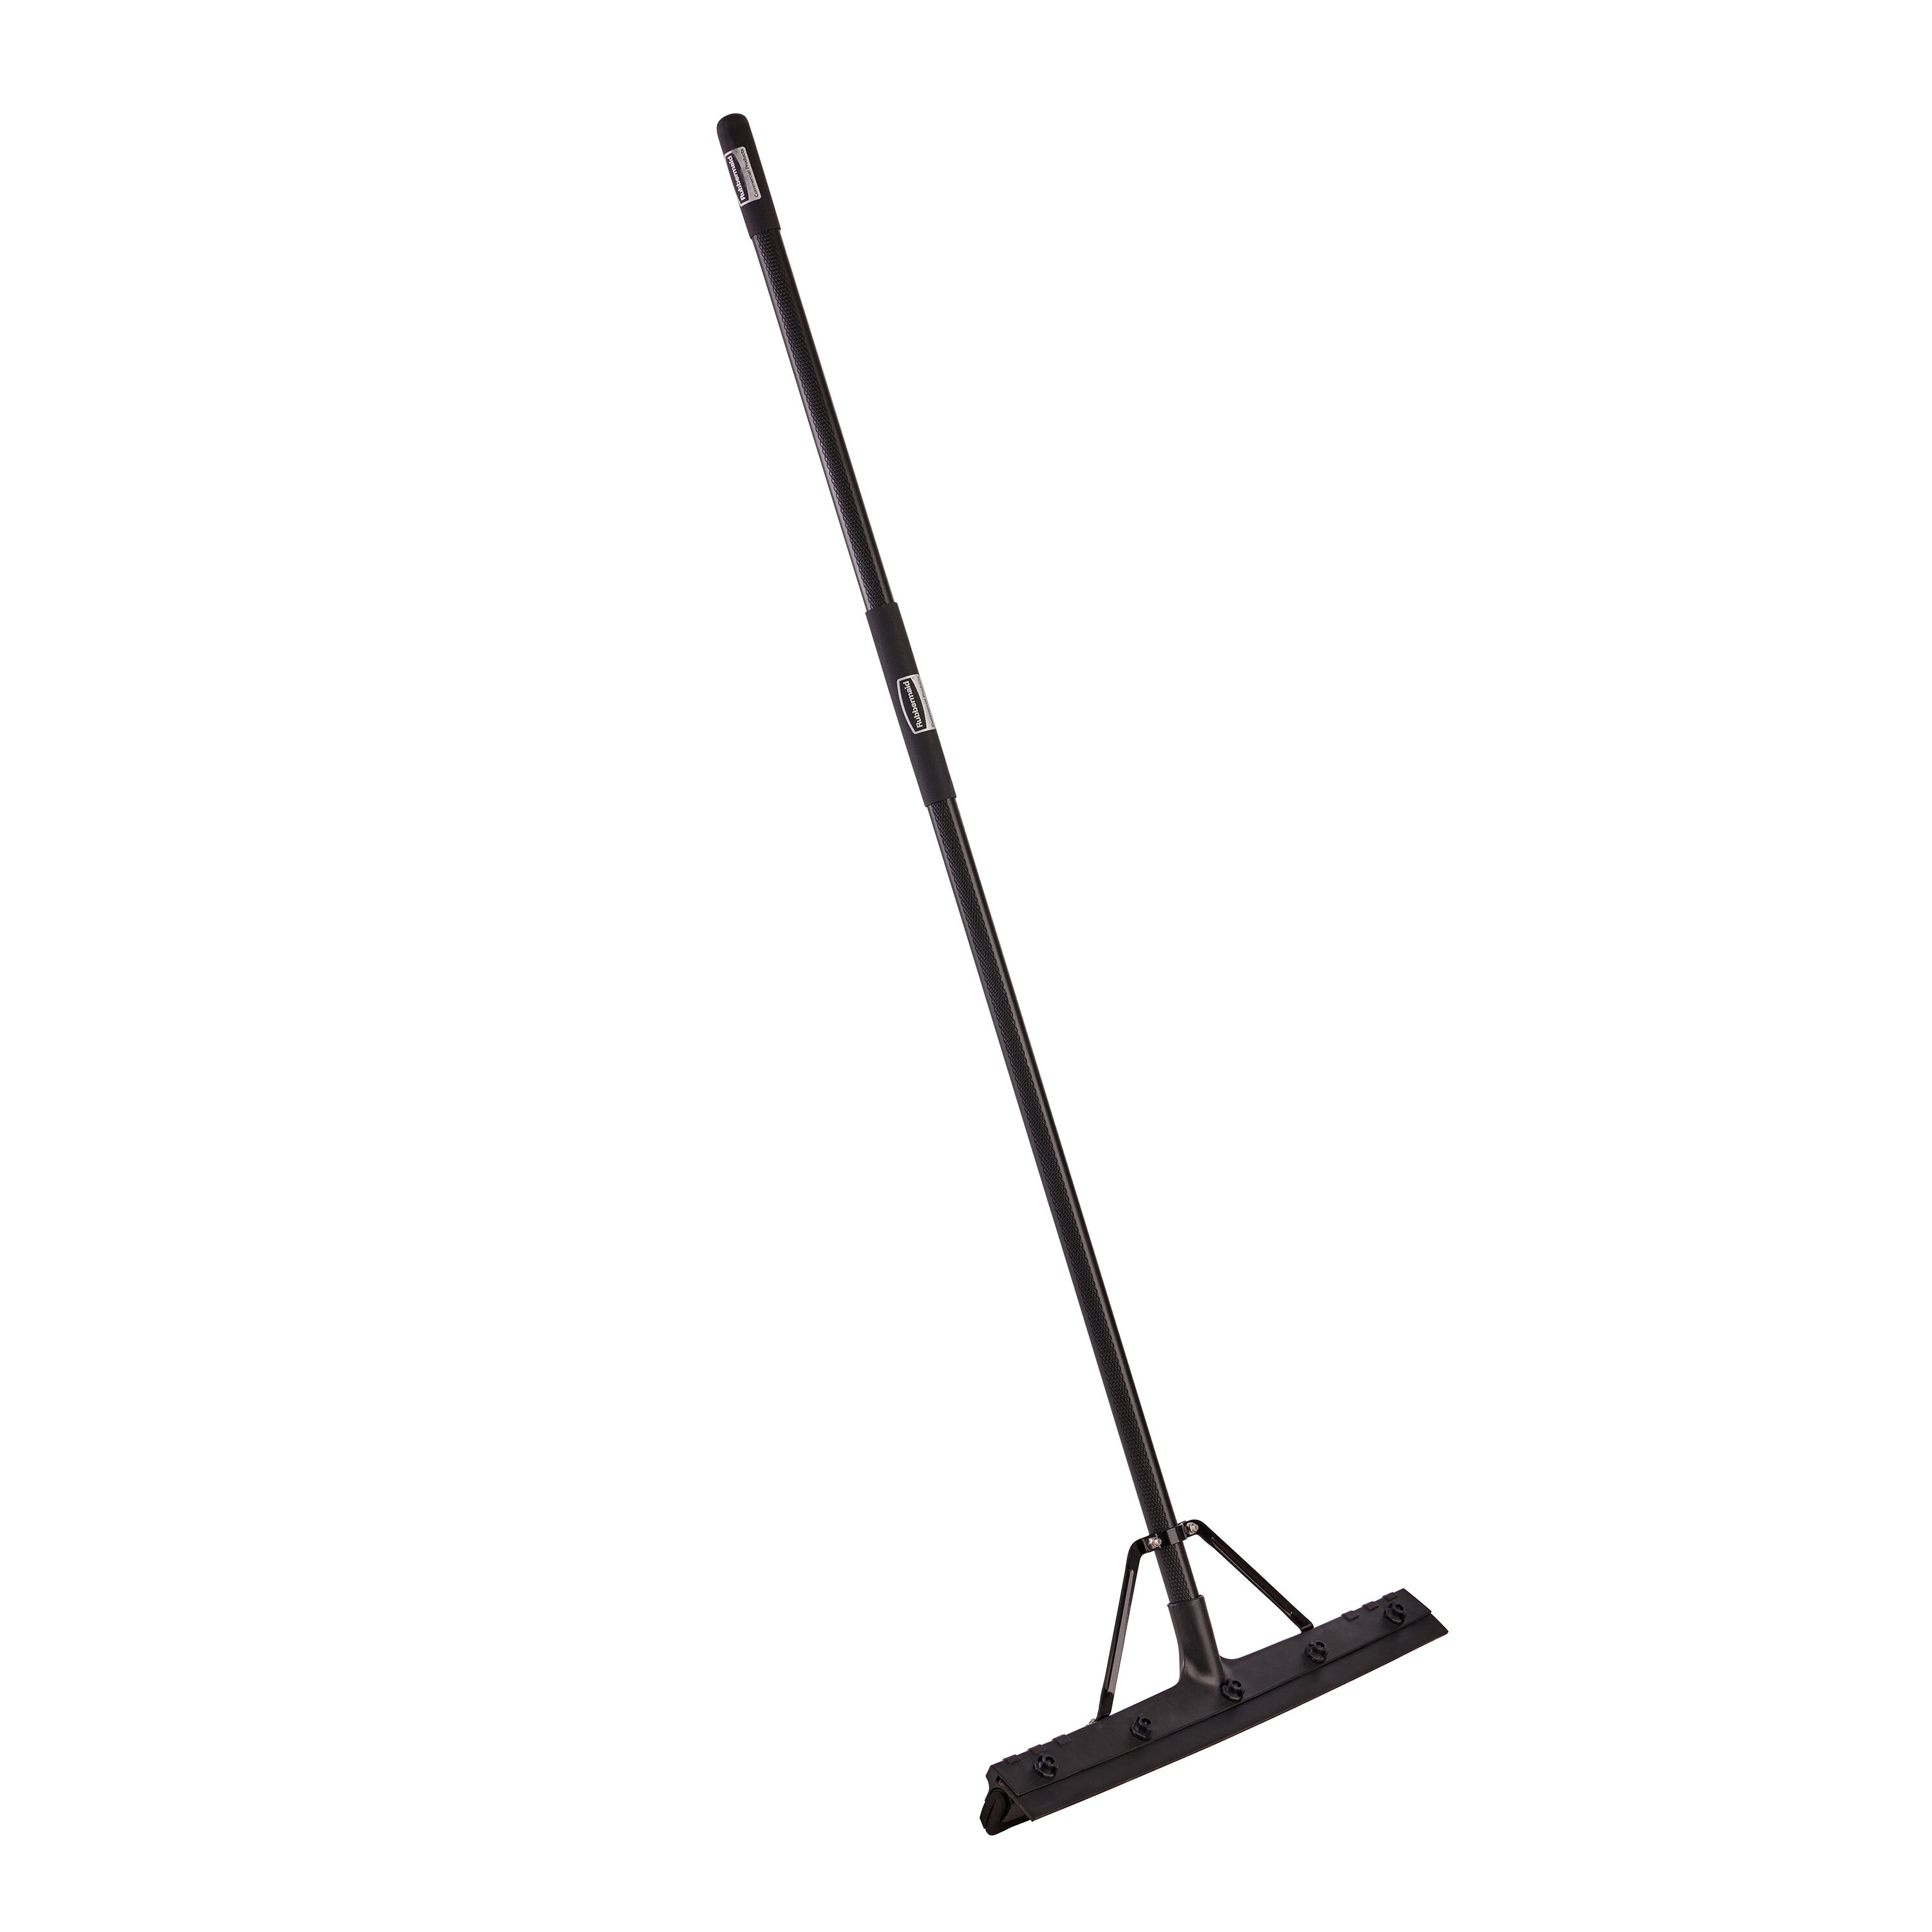 Frafuo RNAB091JQ5477 frafuo shower squeegee for shower doors